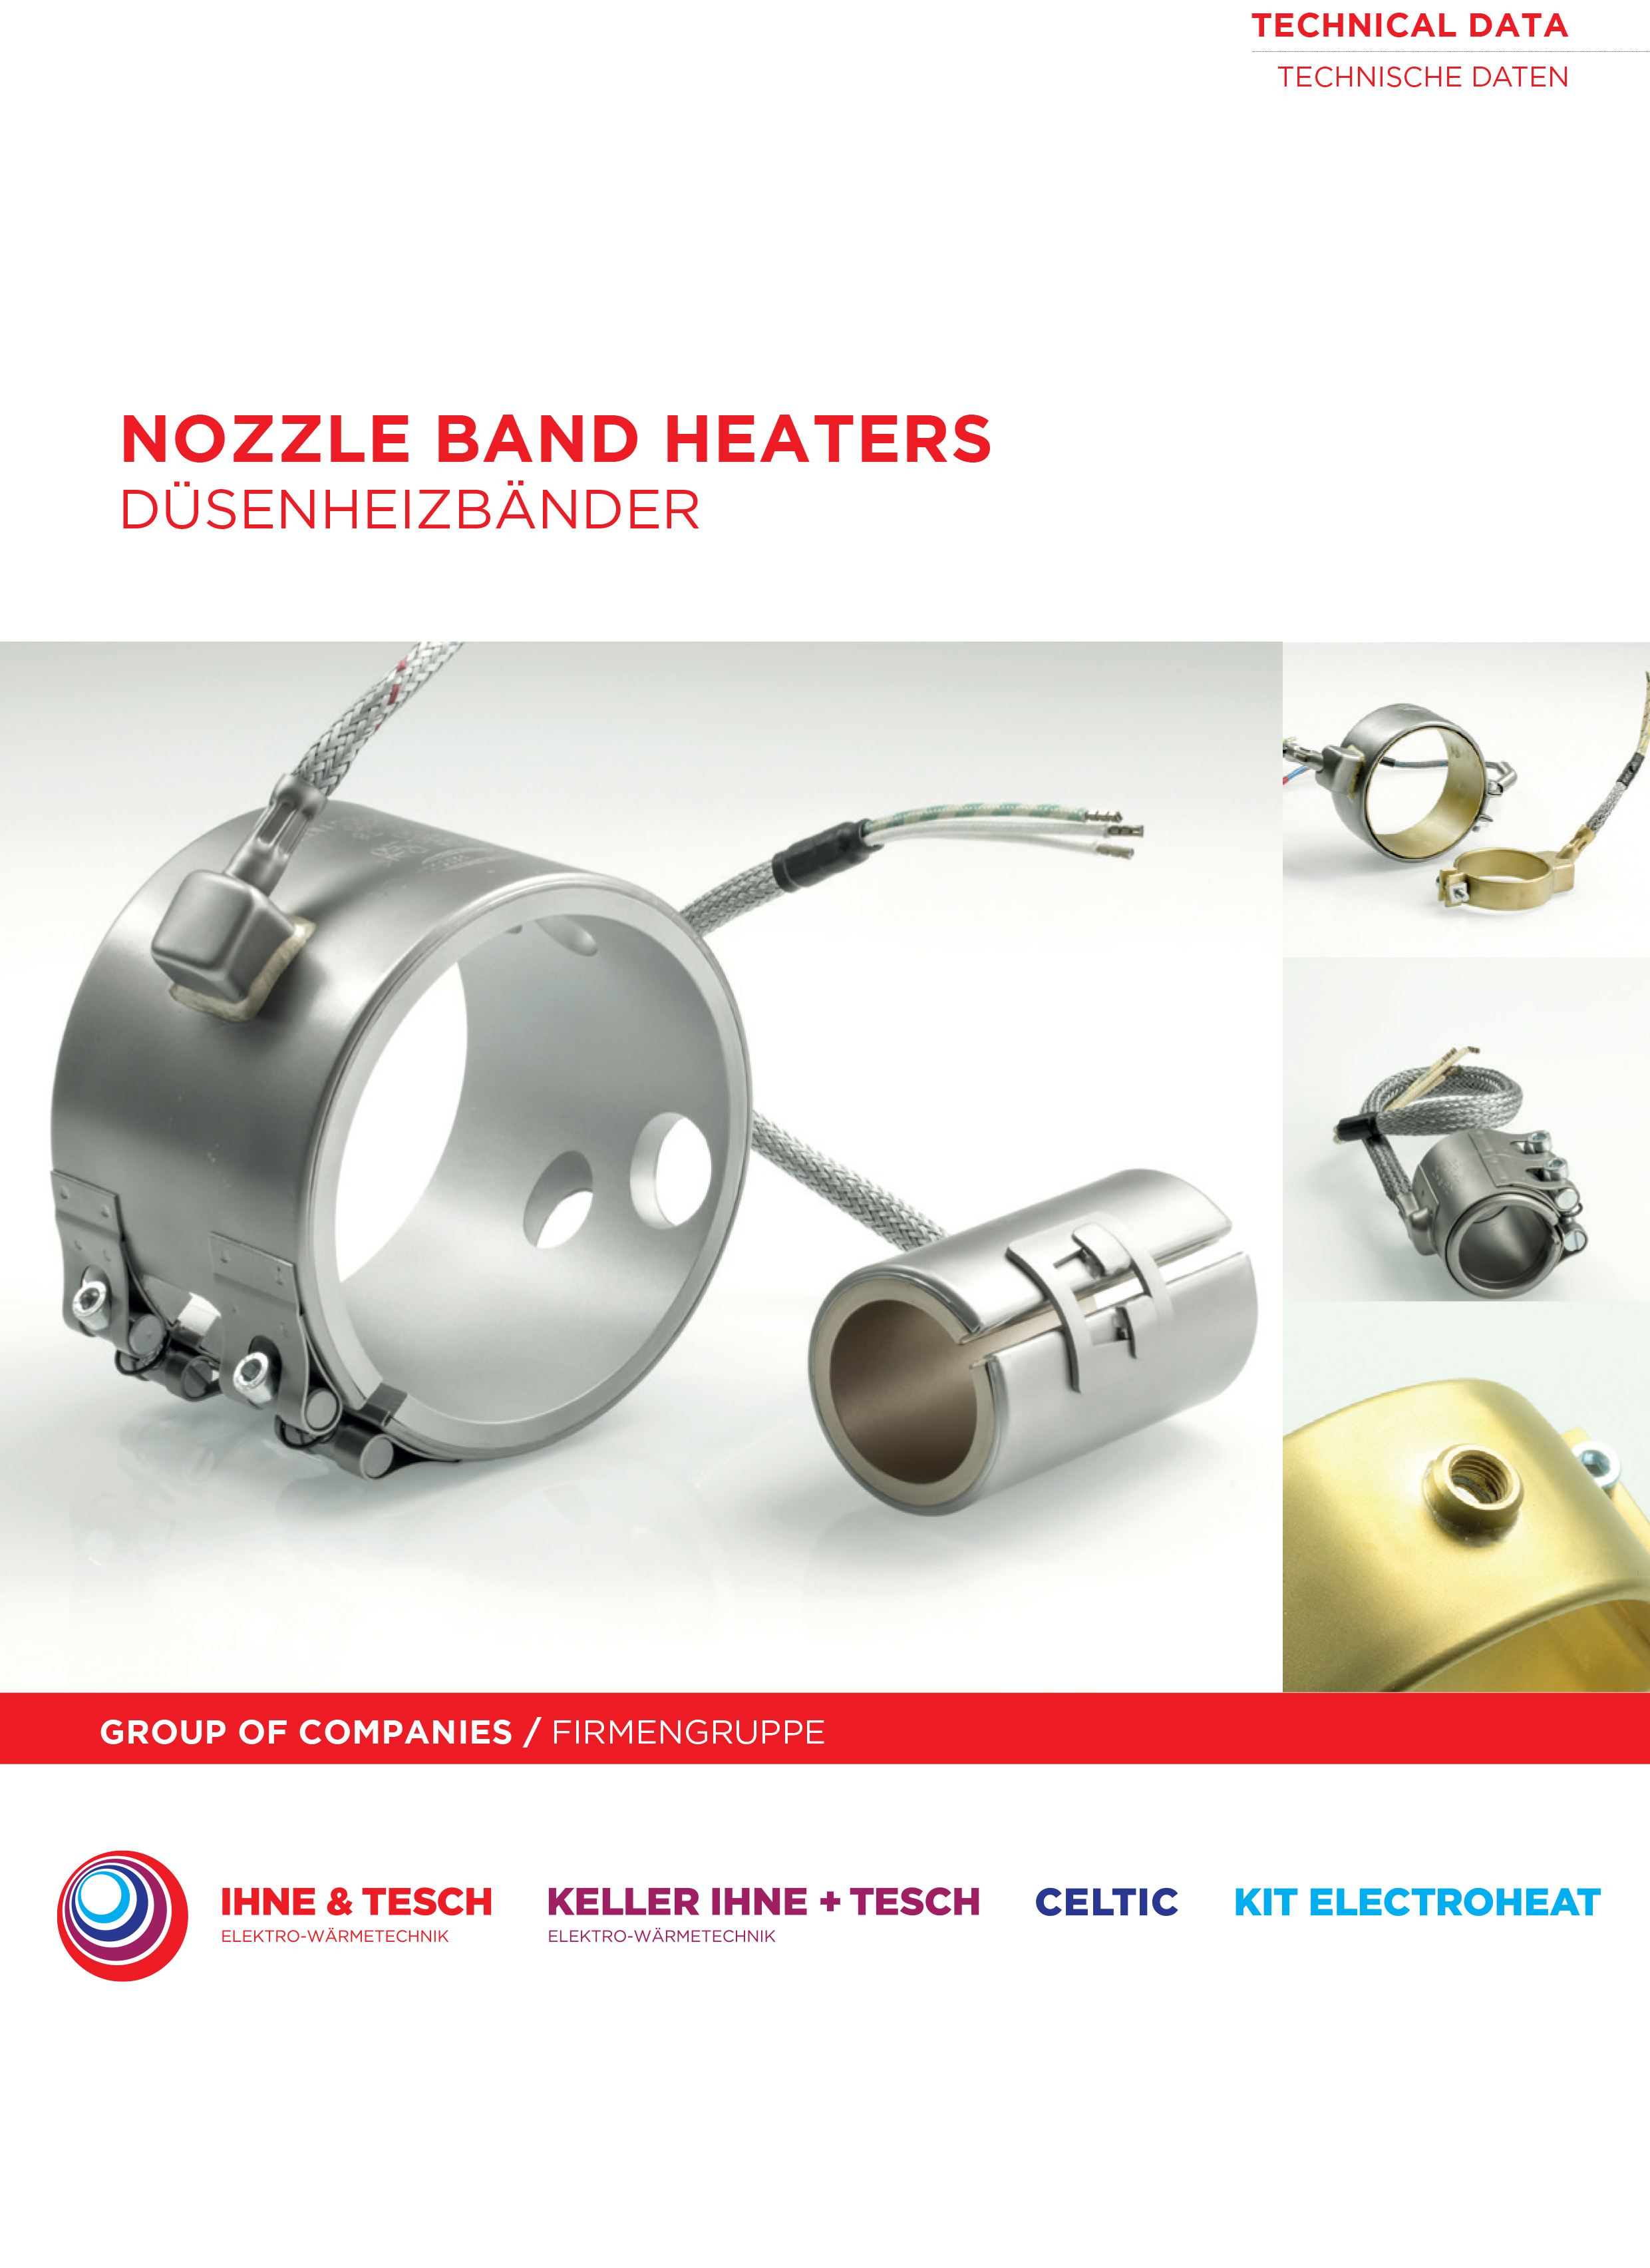 Nozzle-Band-Heaters-technical-data